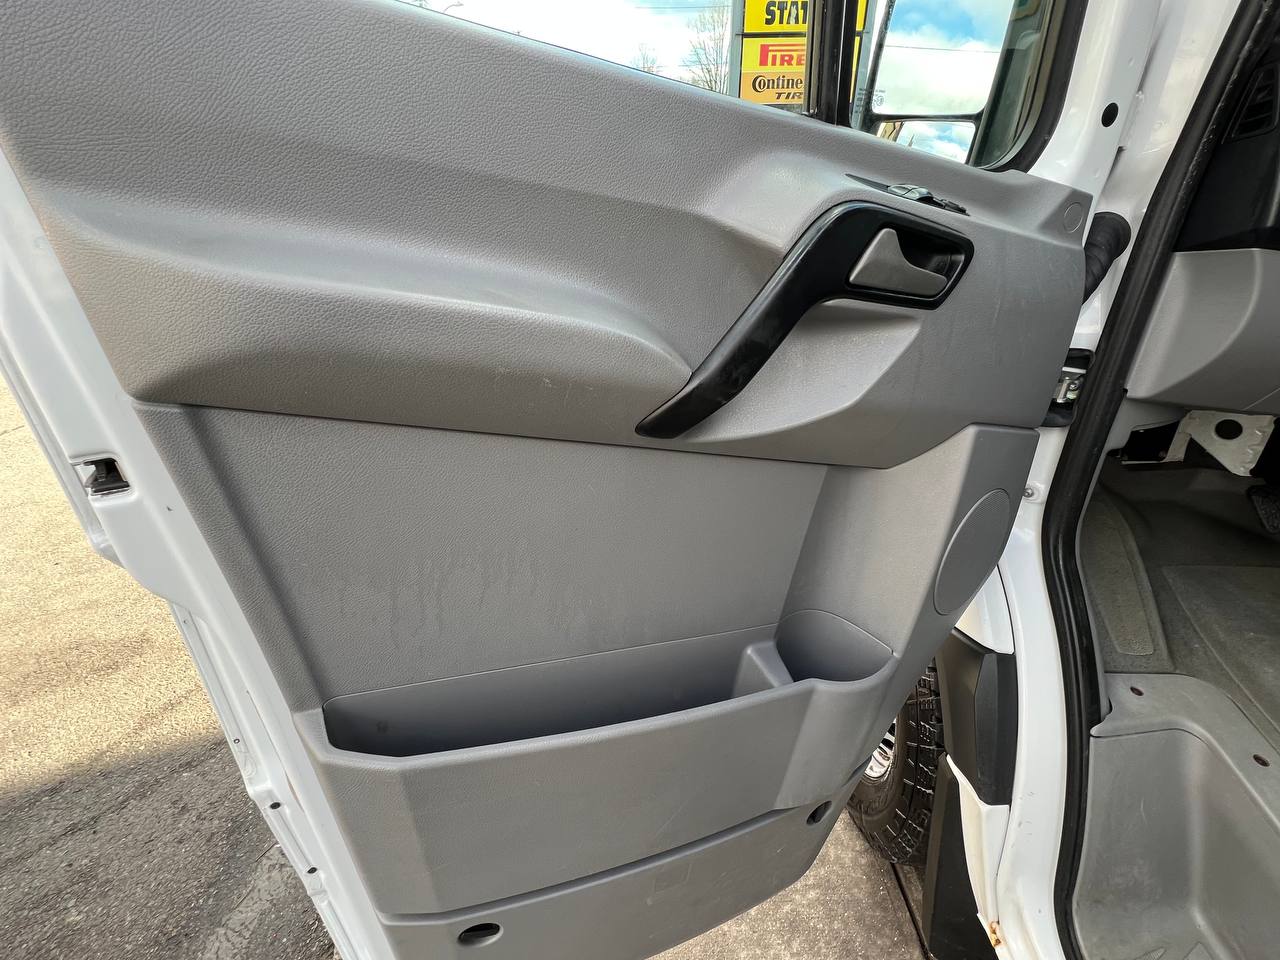 Used - Mersedes-Benz SPRINTER 2500 CARGO VAN for sale in Staten Island NY